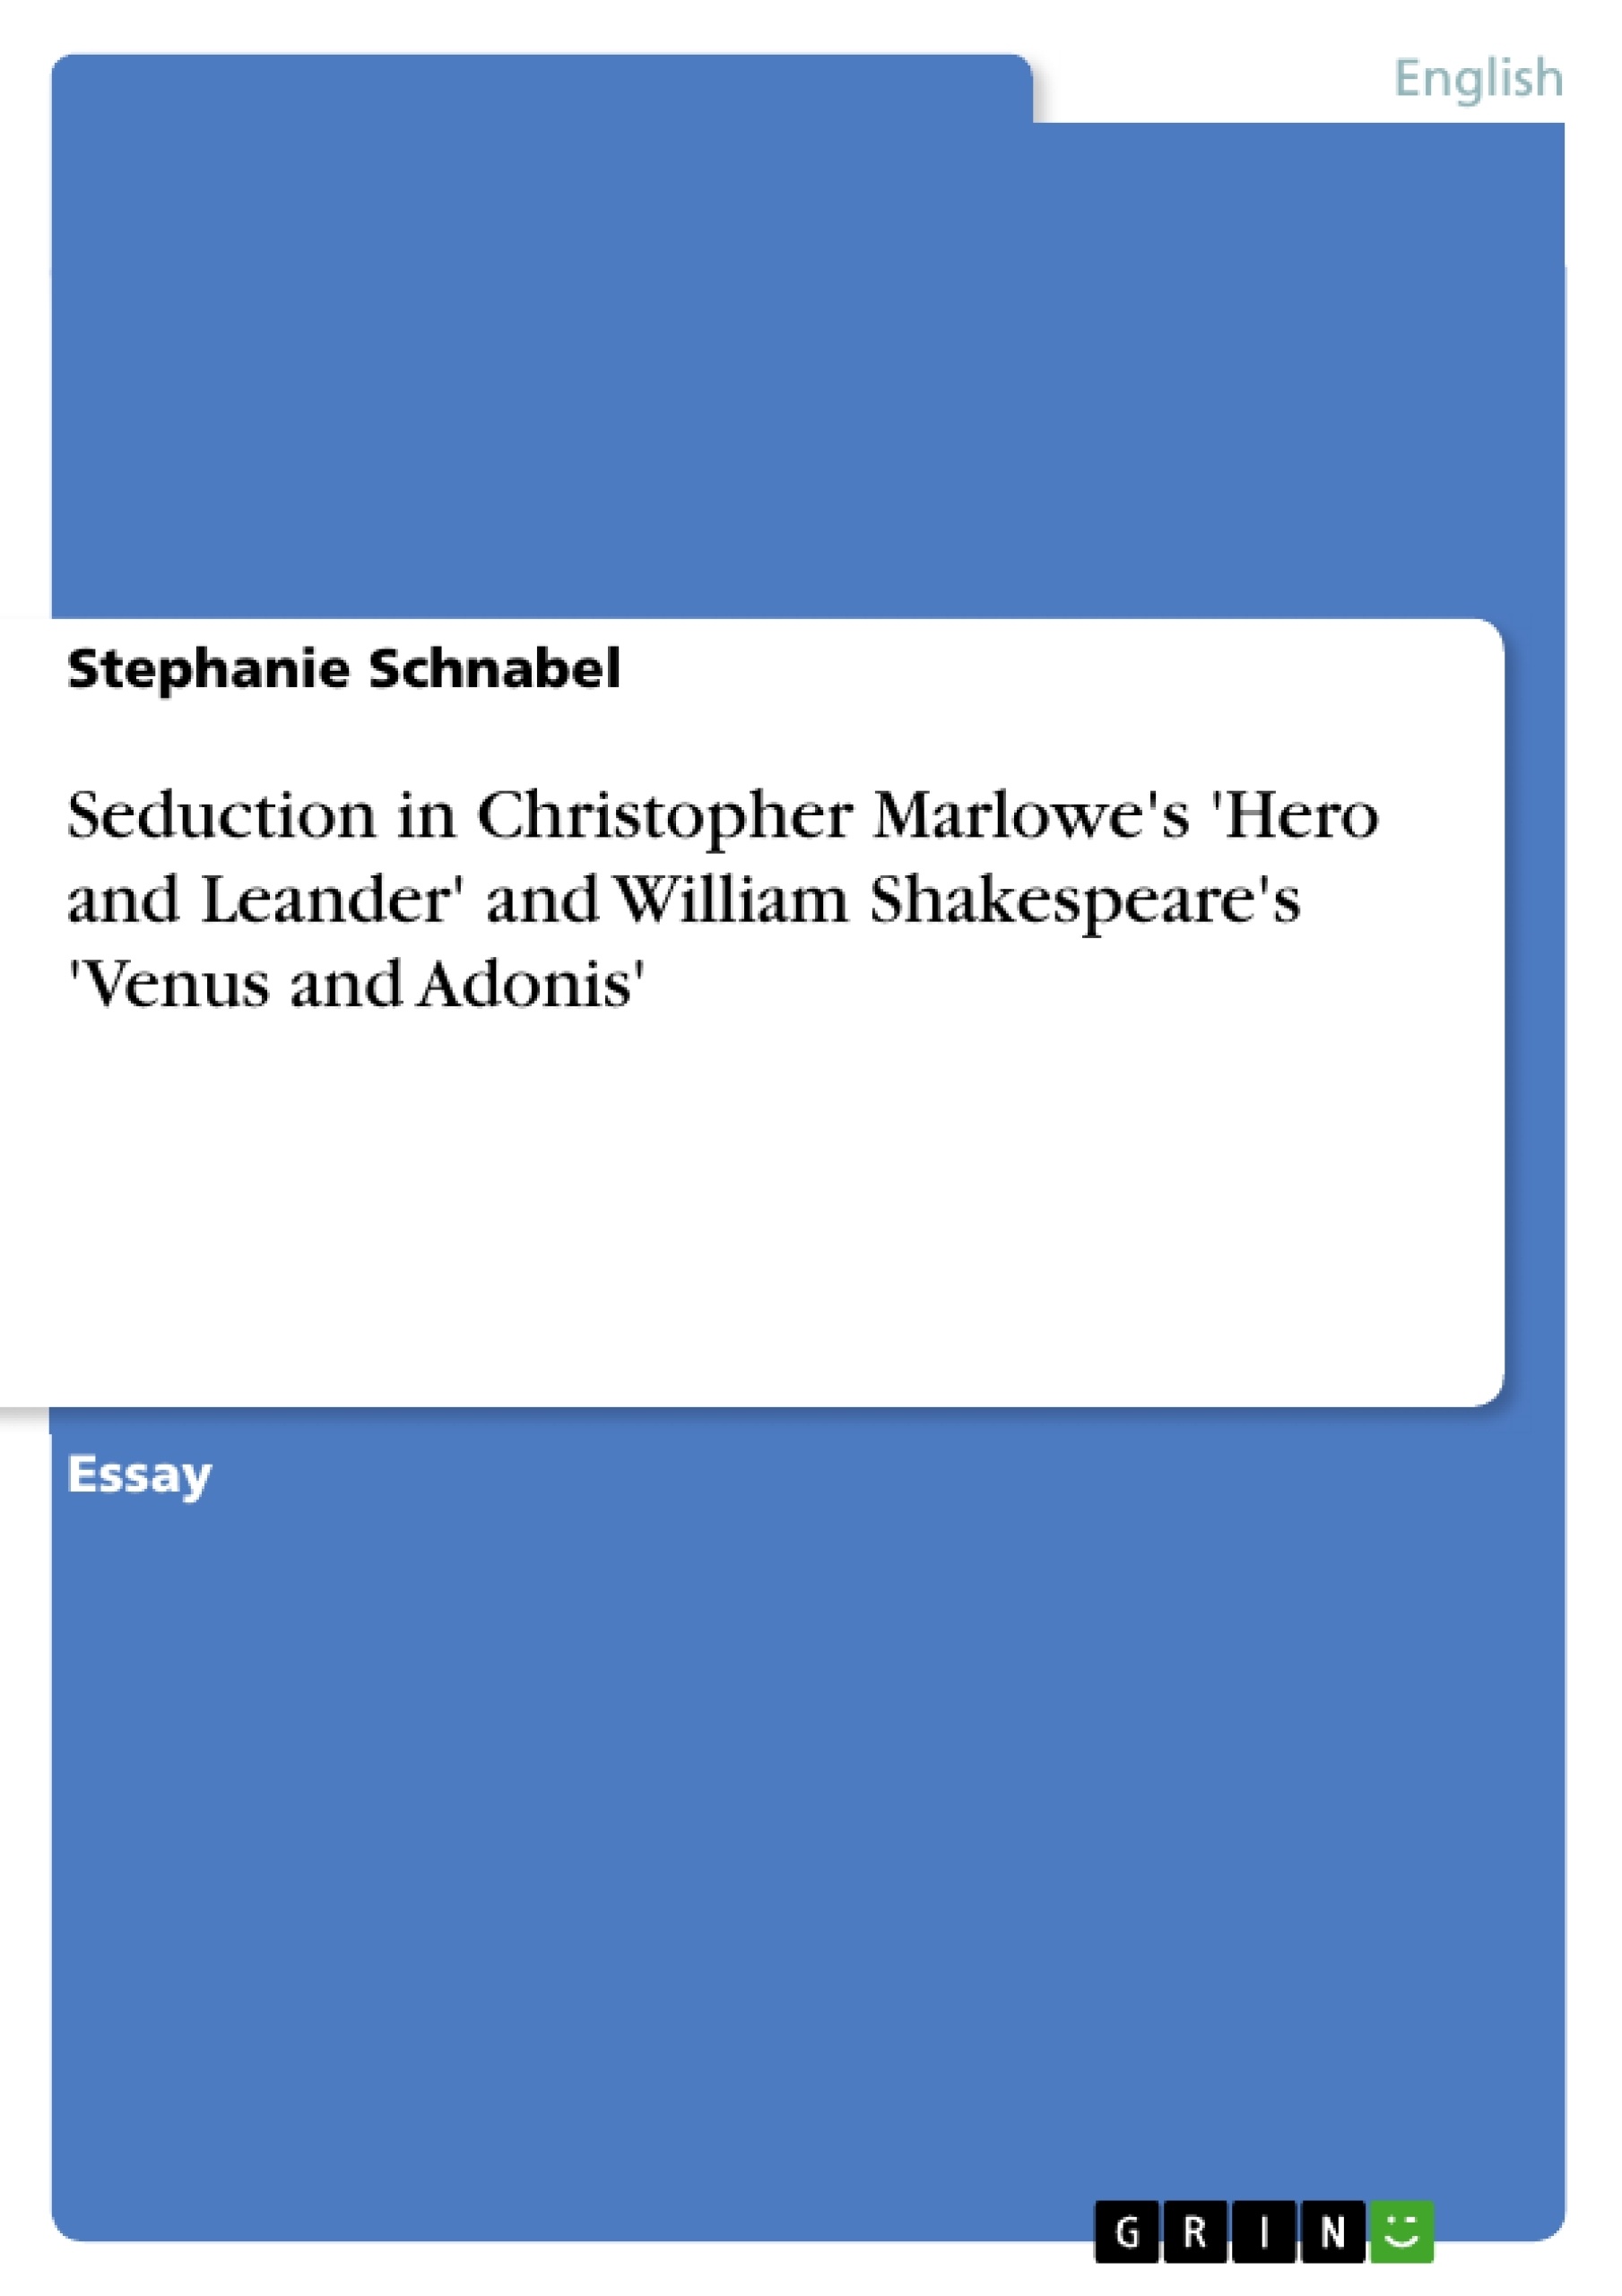 Title: Seduction in Christopher Marlowe's 'Hero and Leander' and William Shakespeare's 'Venus and Adonis'